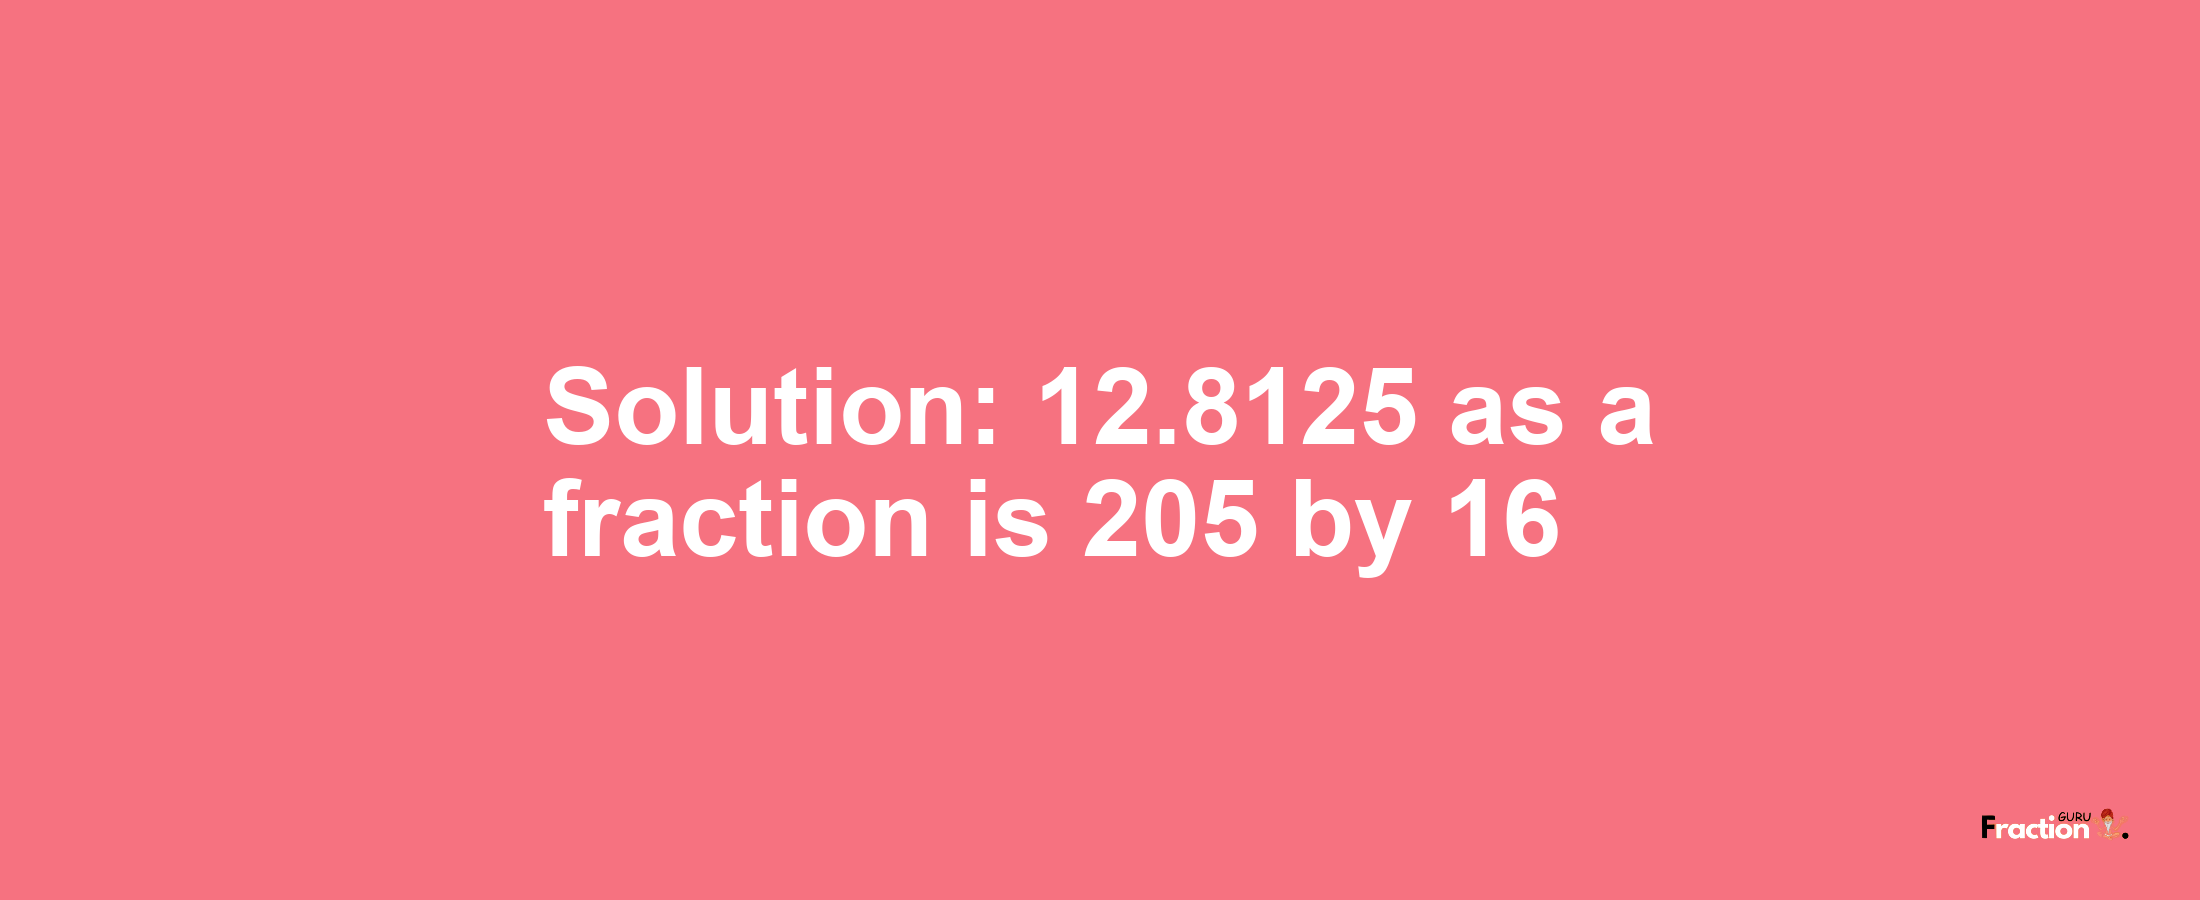 Solution:12.8125 as a fraction is 205/16